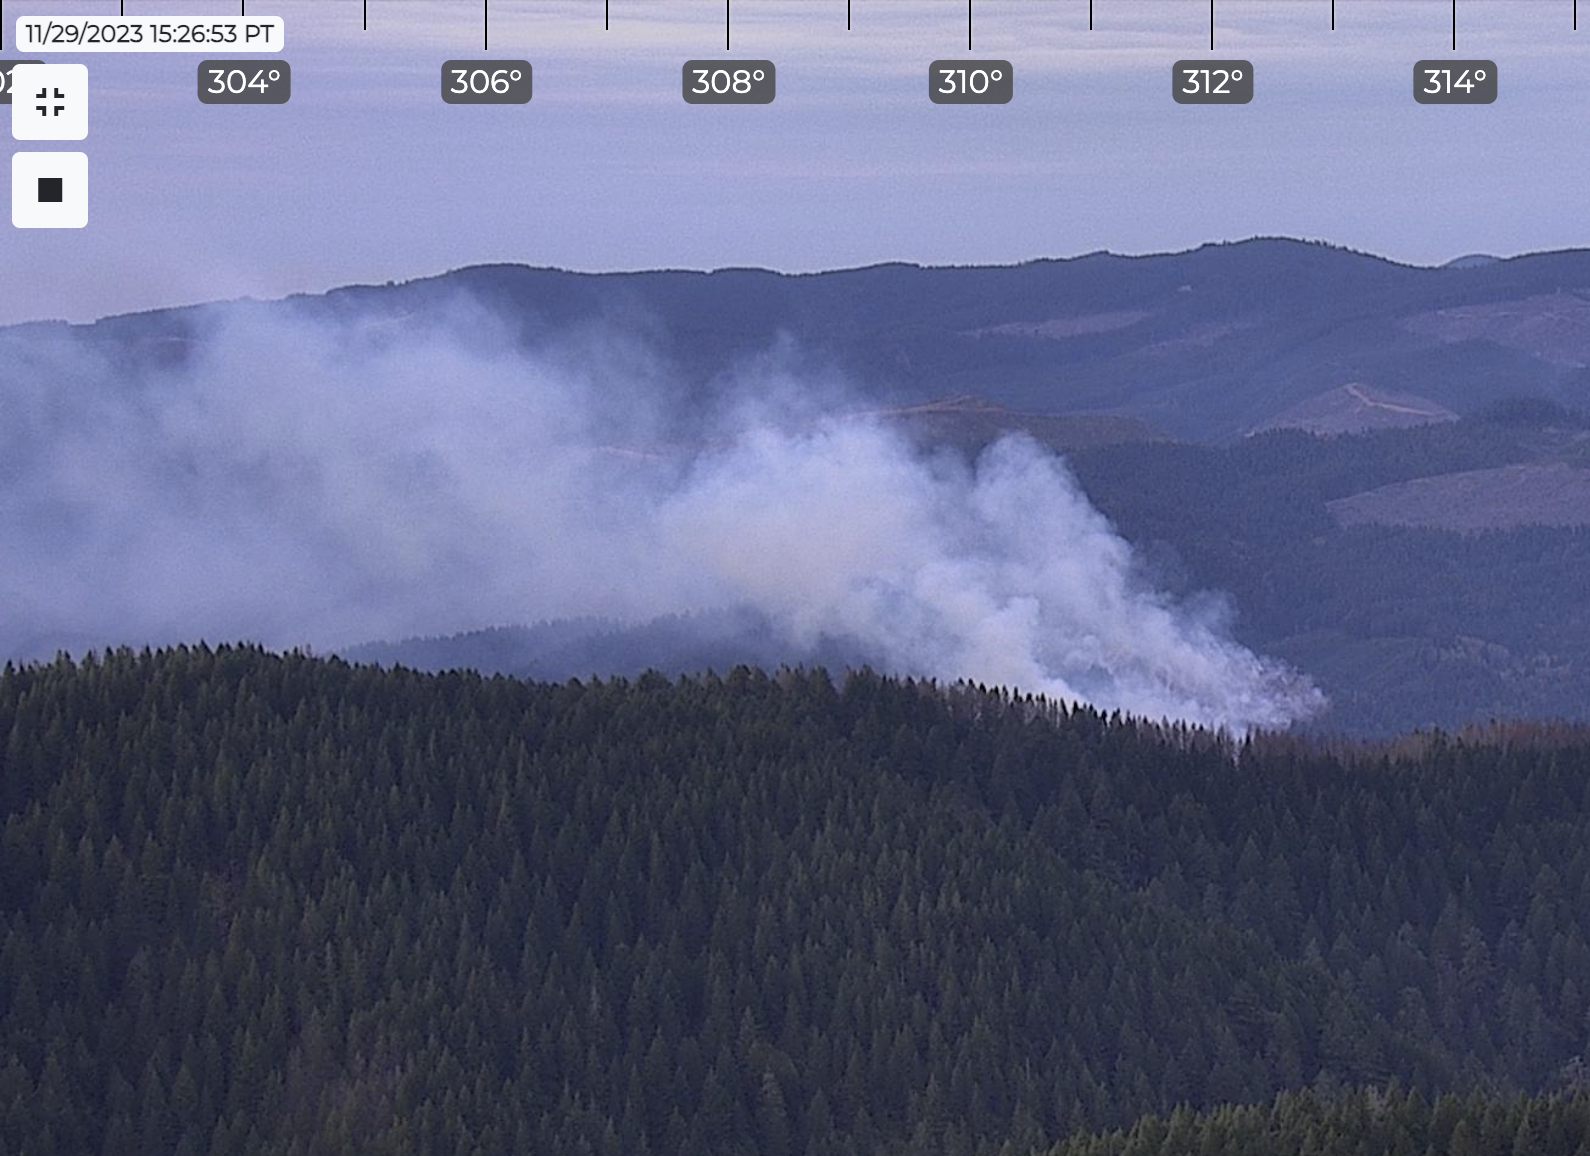 Anvil Fire from livestream camera on Butler Mountain